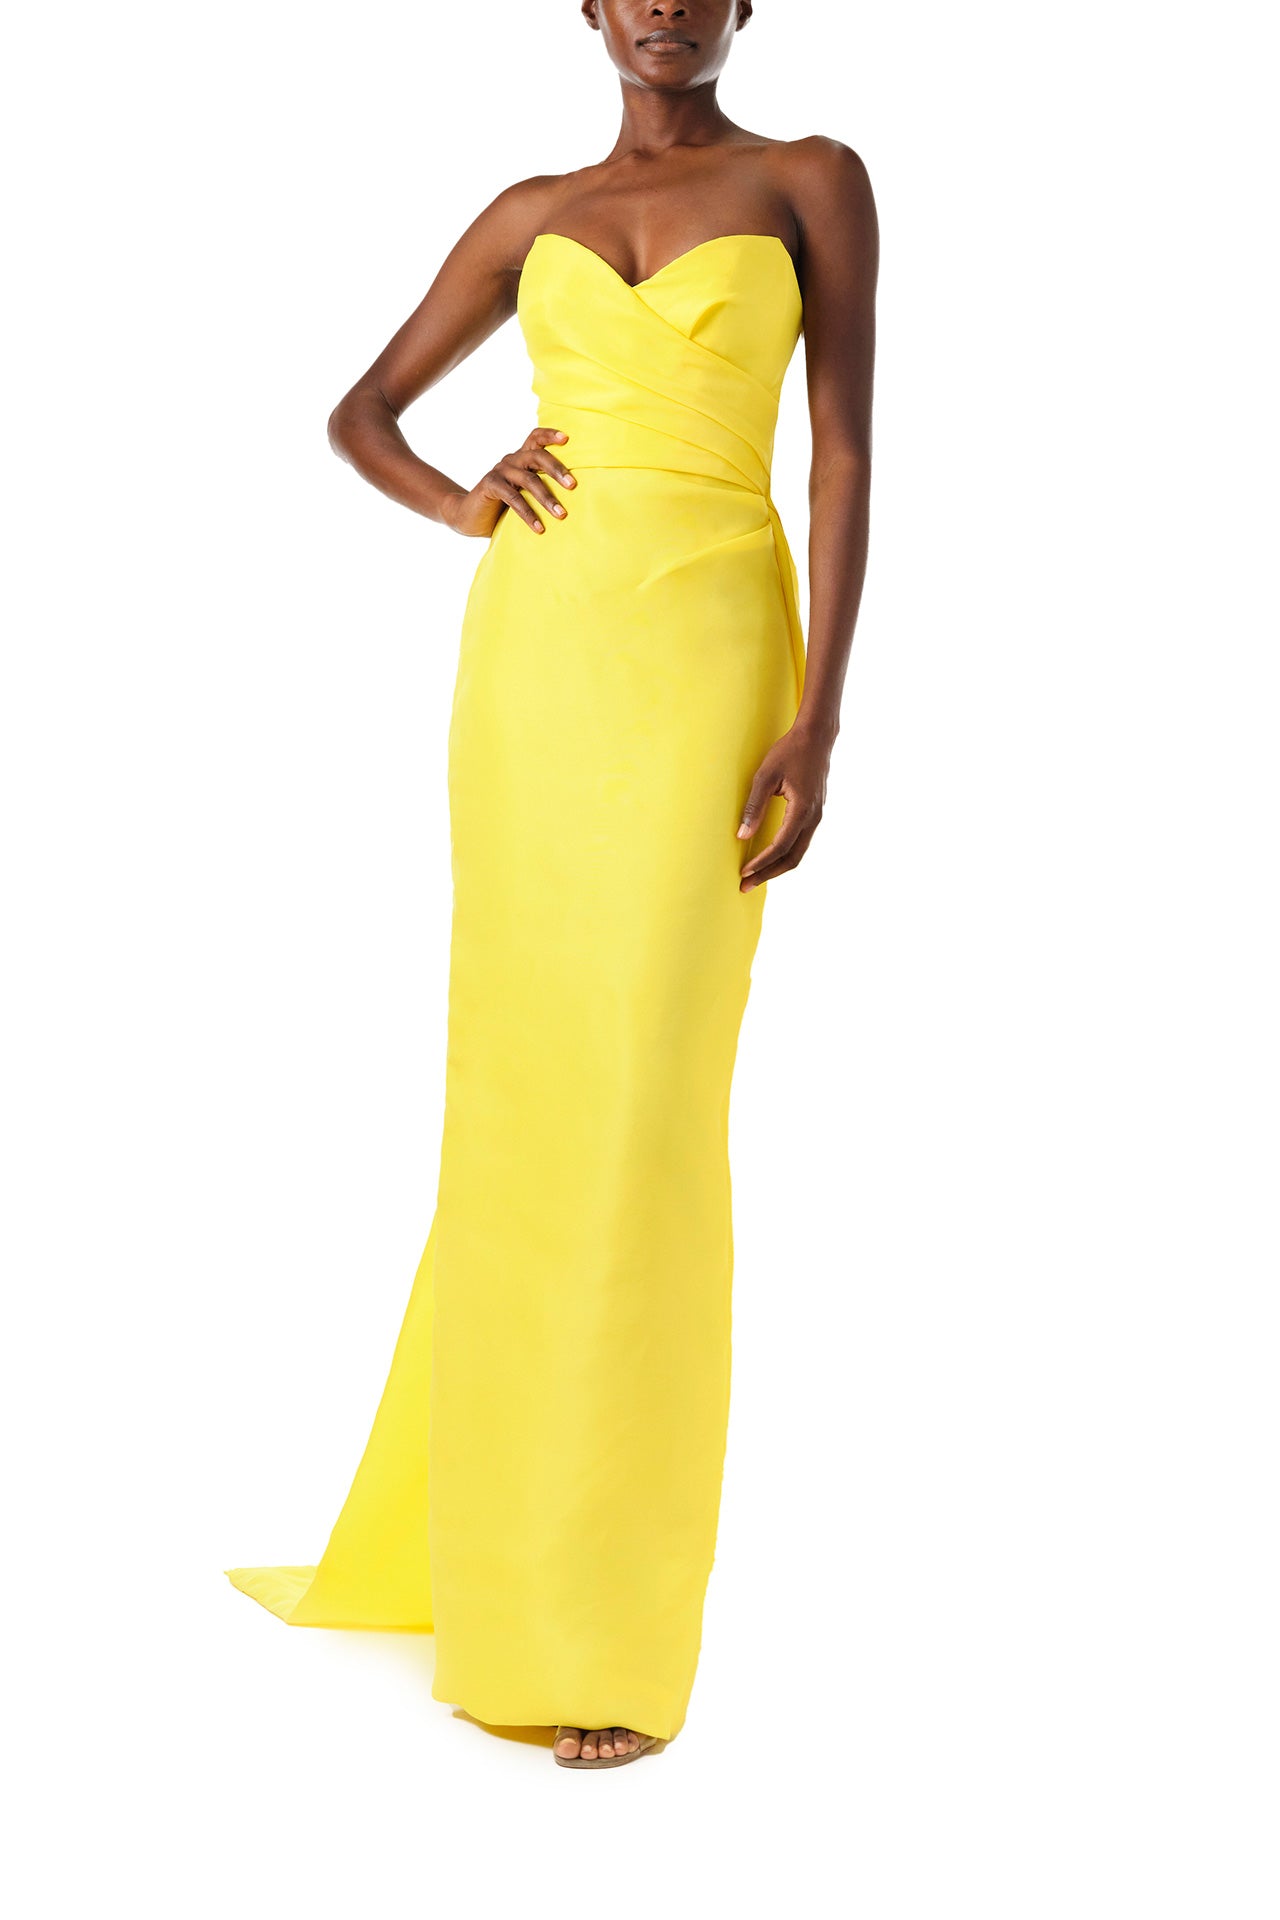 Monique Lhuillier Spring 2024 yellow strapless gown with sweetheart neckline and train - front.